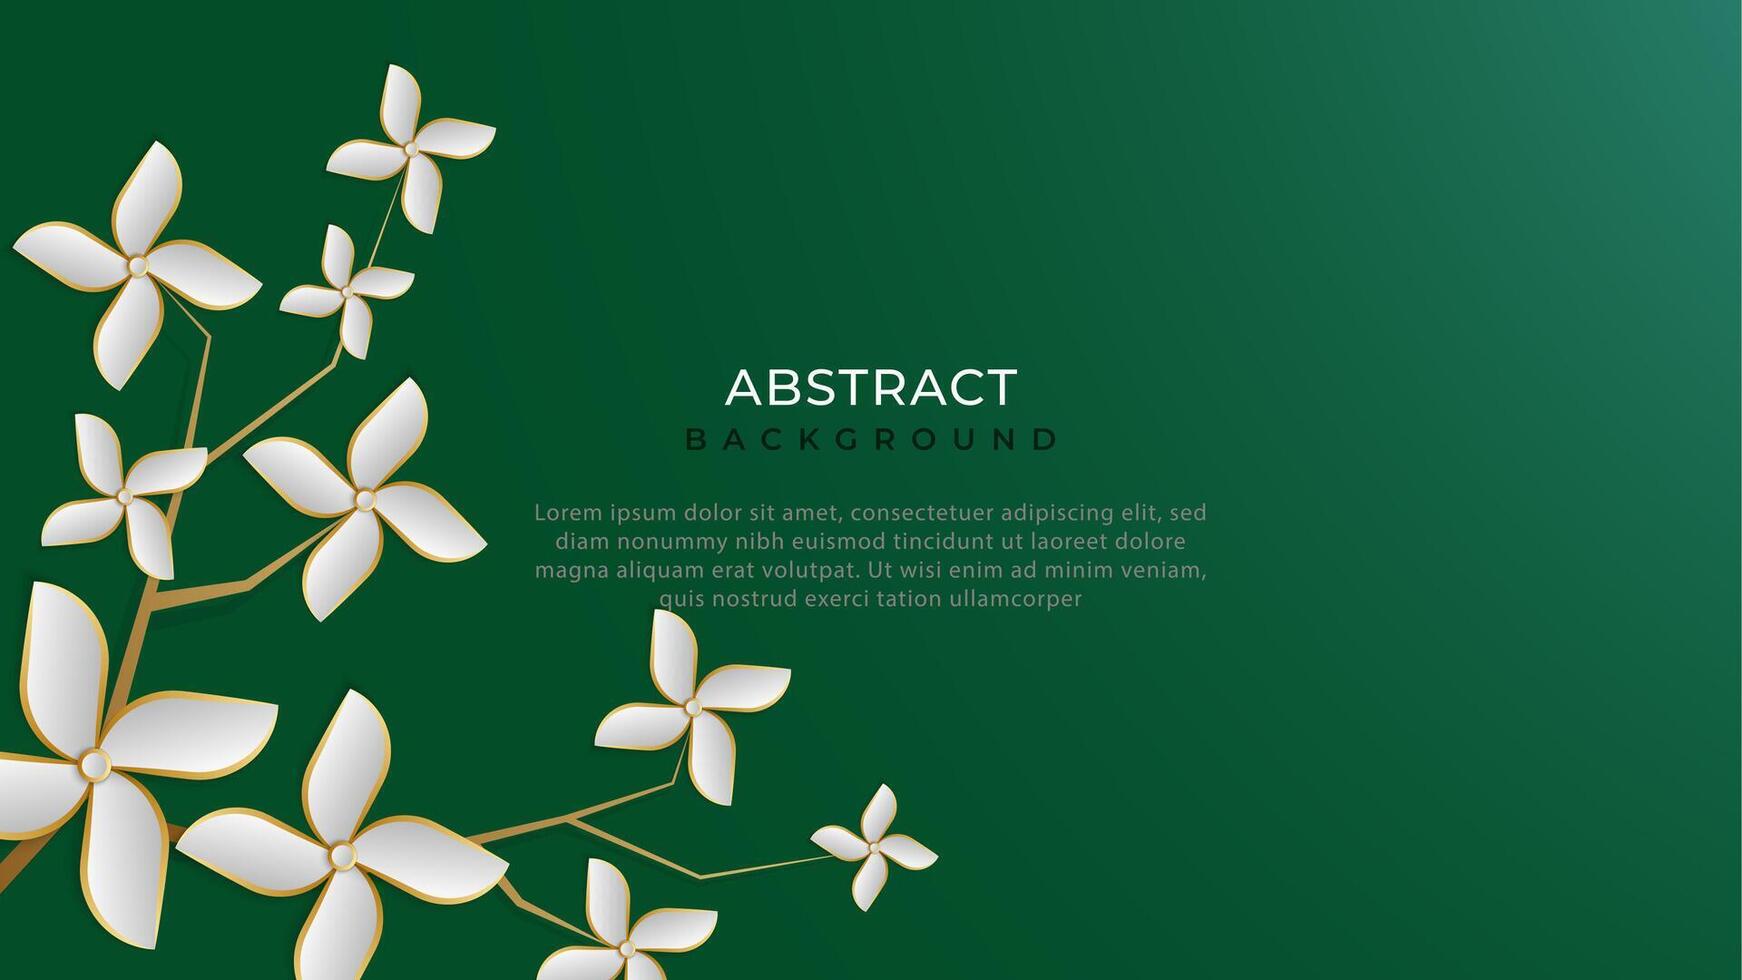 Green simple background with 3d floral elements vector